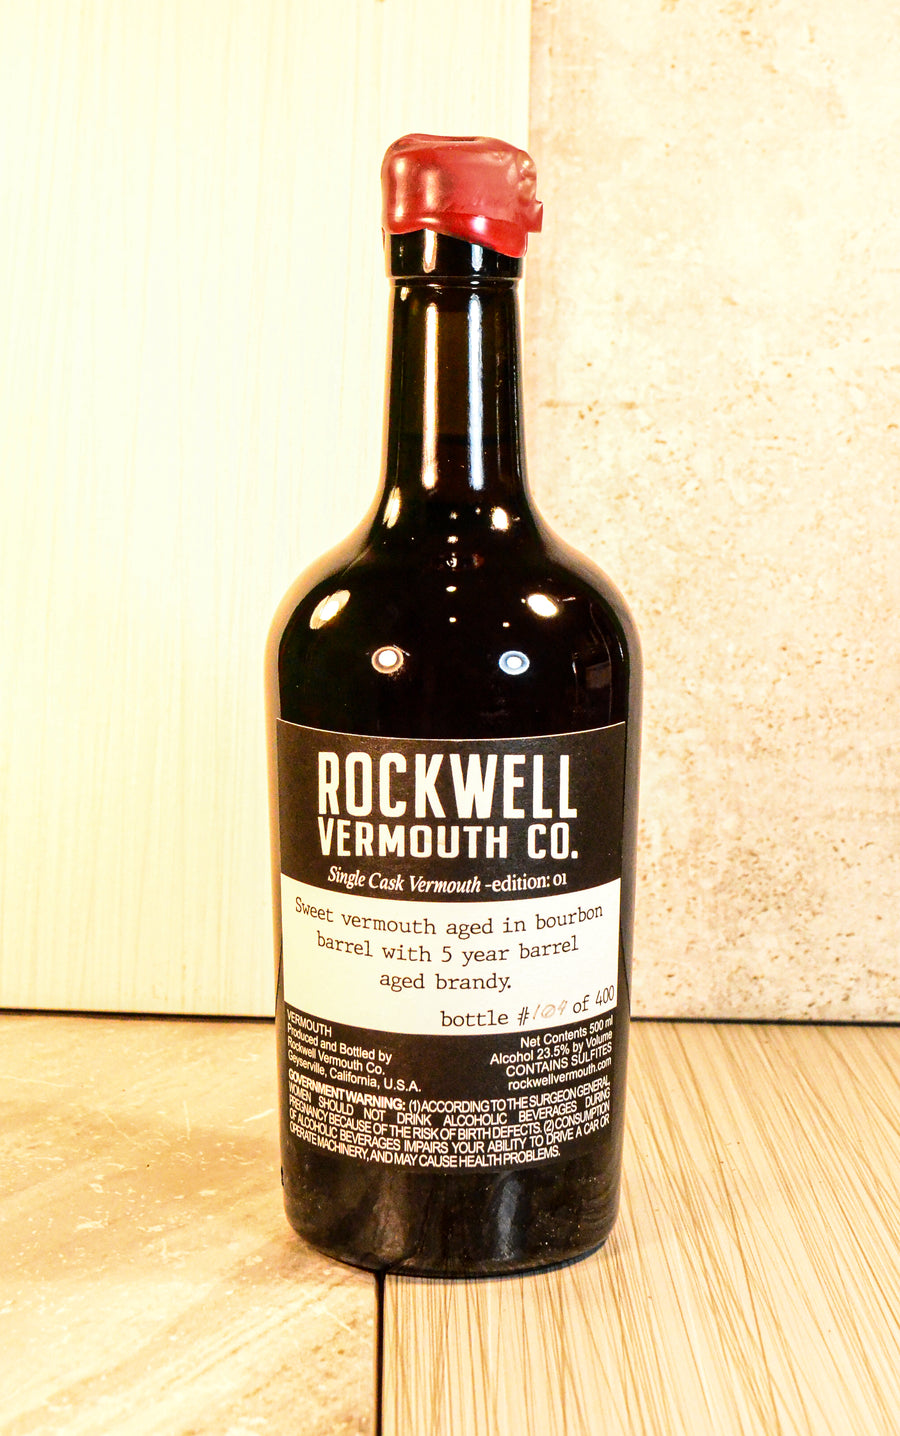 Rockwell Vermouth Co., Single Cask Reserve